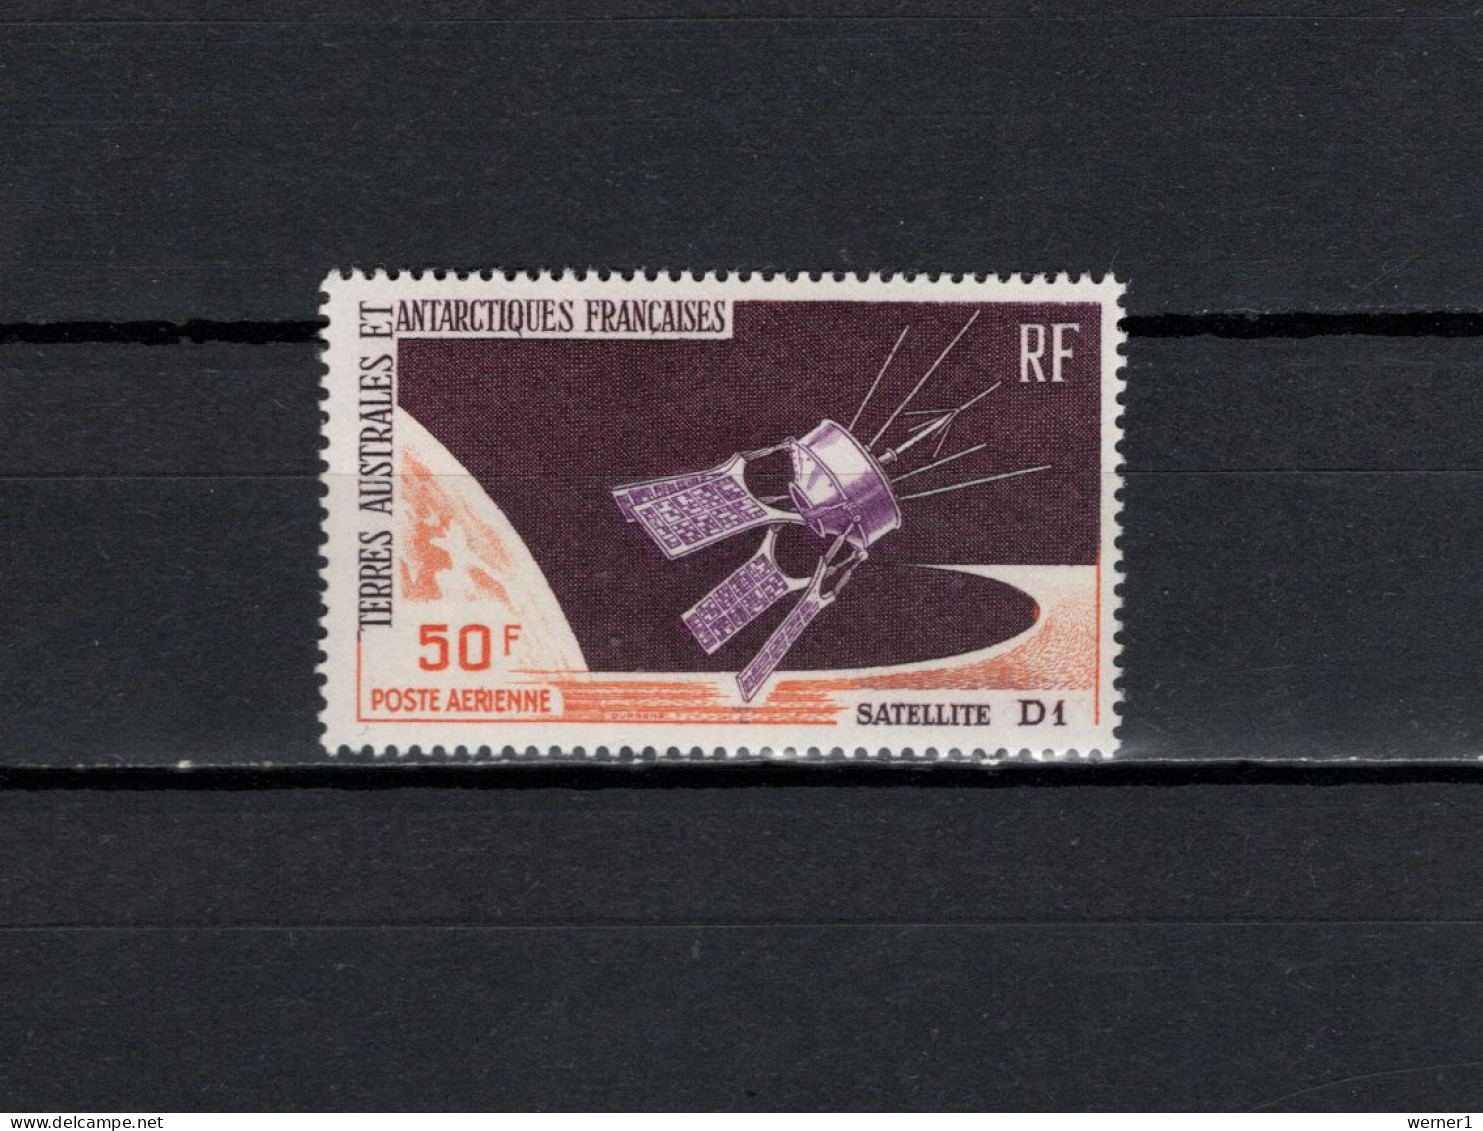 FSAT French Antarctic Territory 1966 Space, D1 Satellite Stamp MNH - Océanie